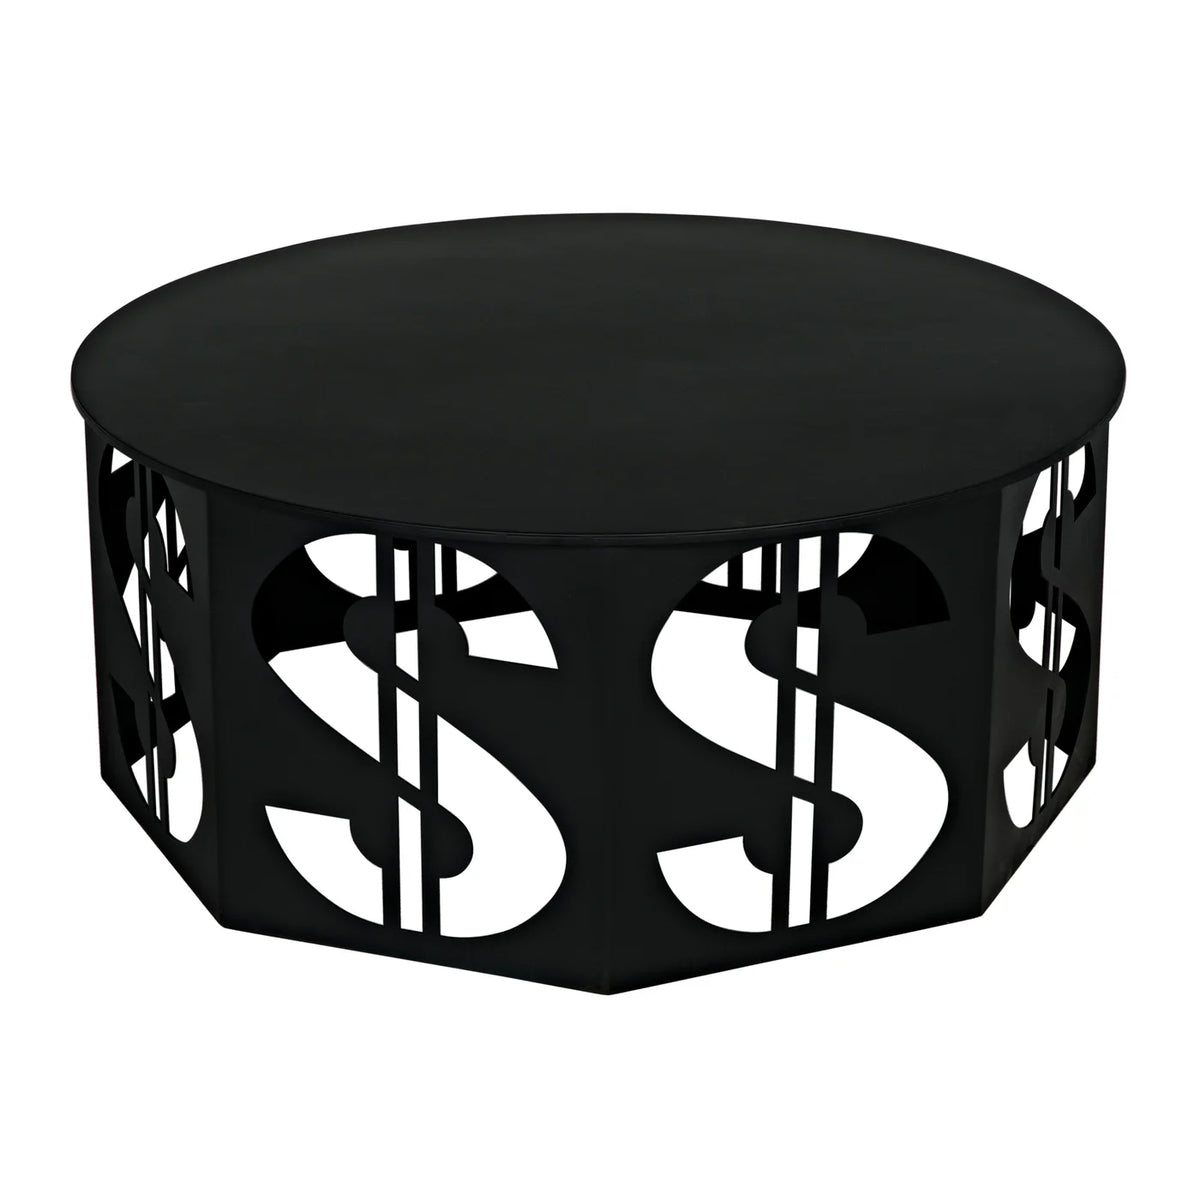 Rich Coffee Table